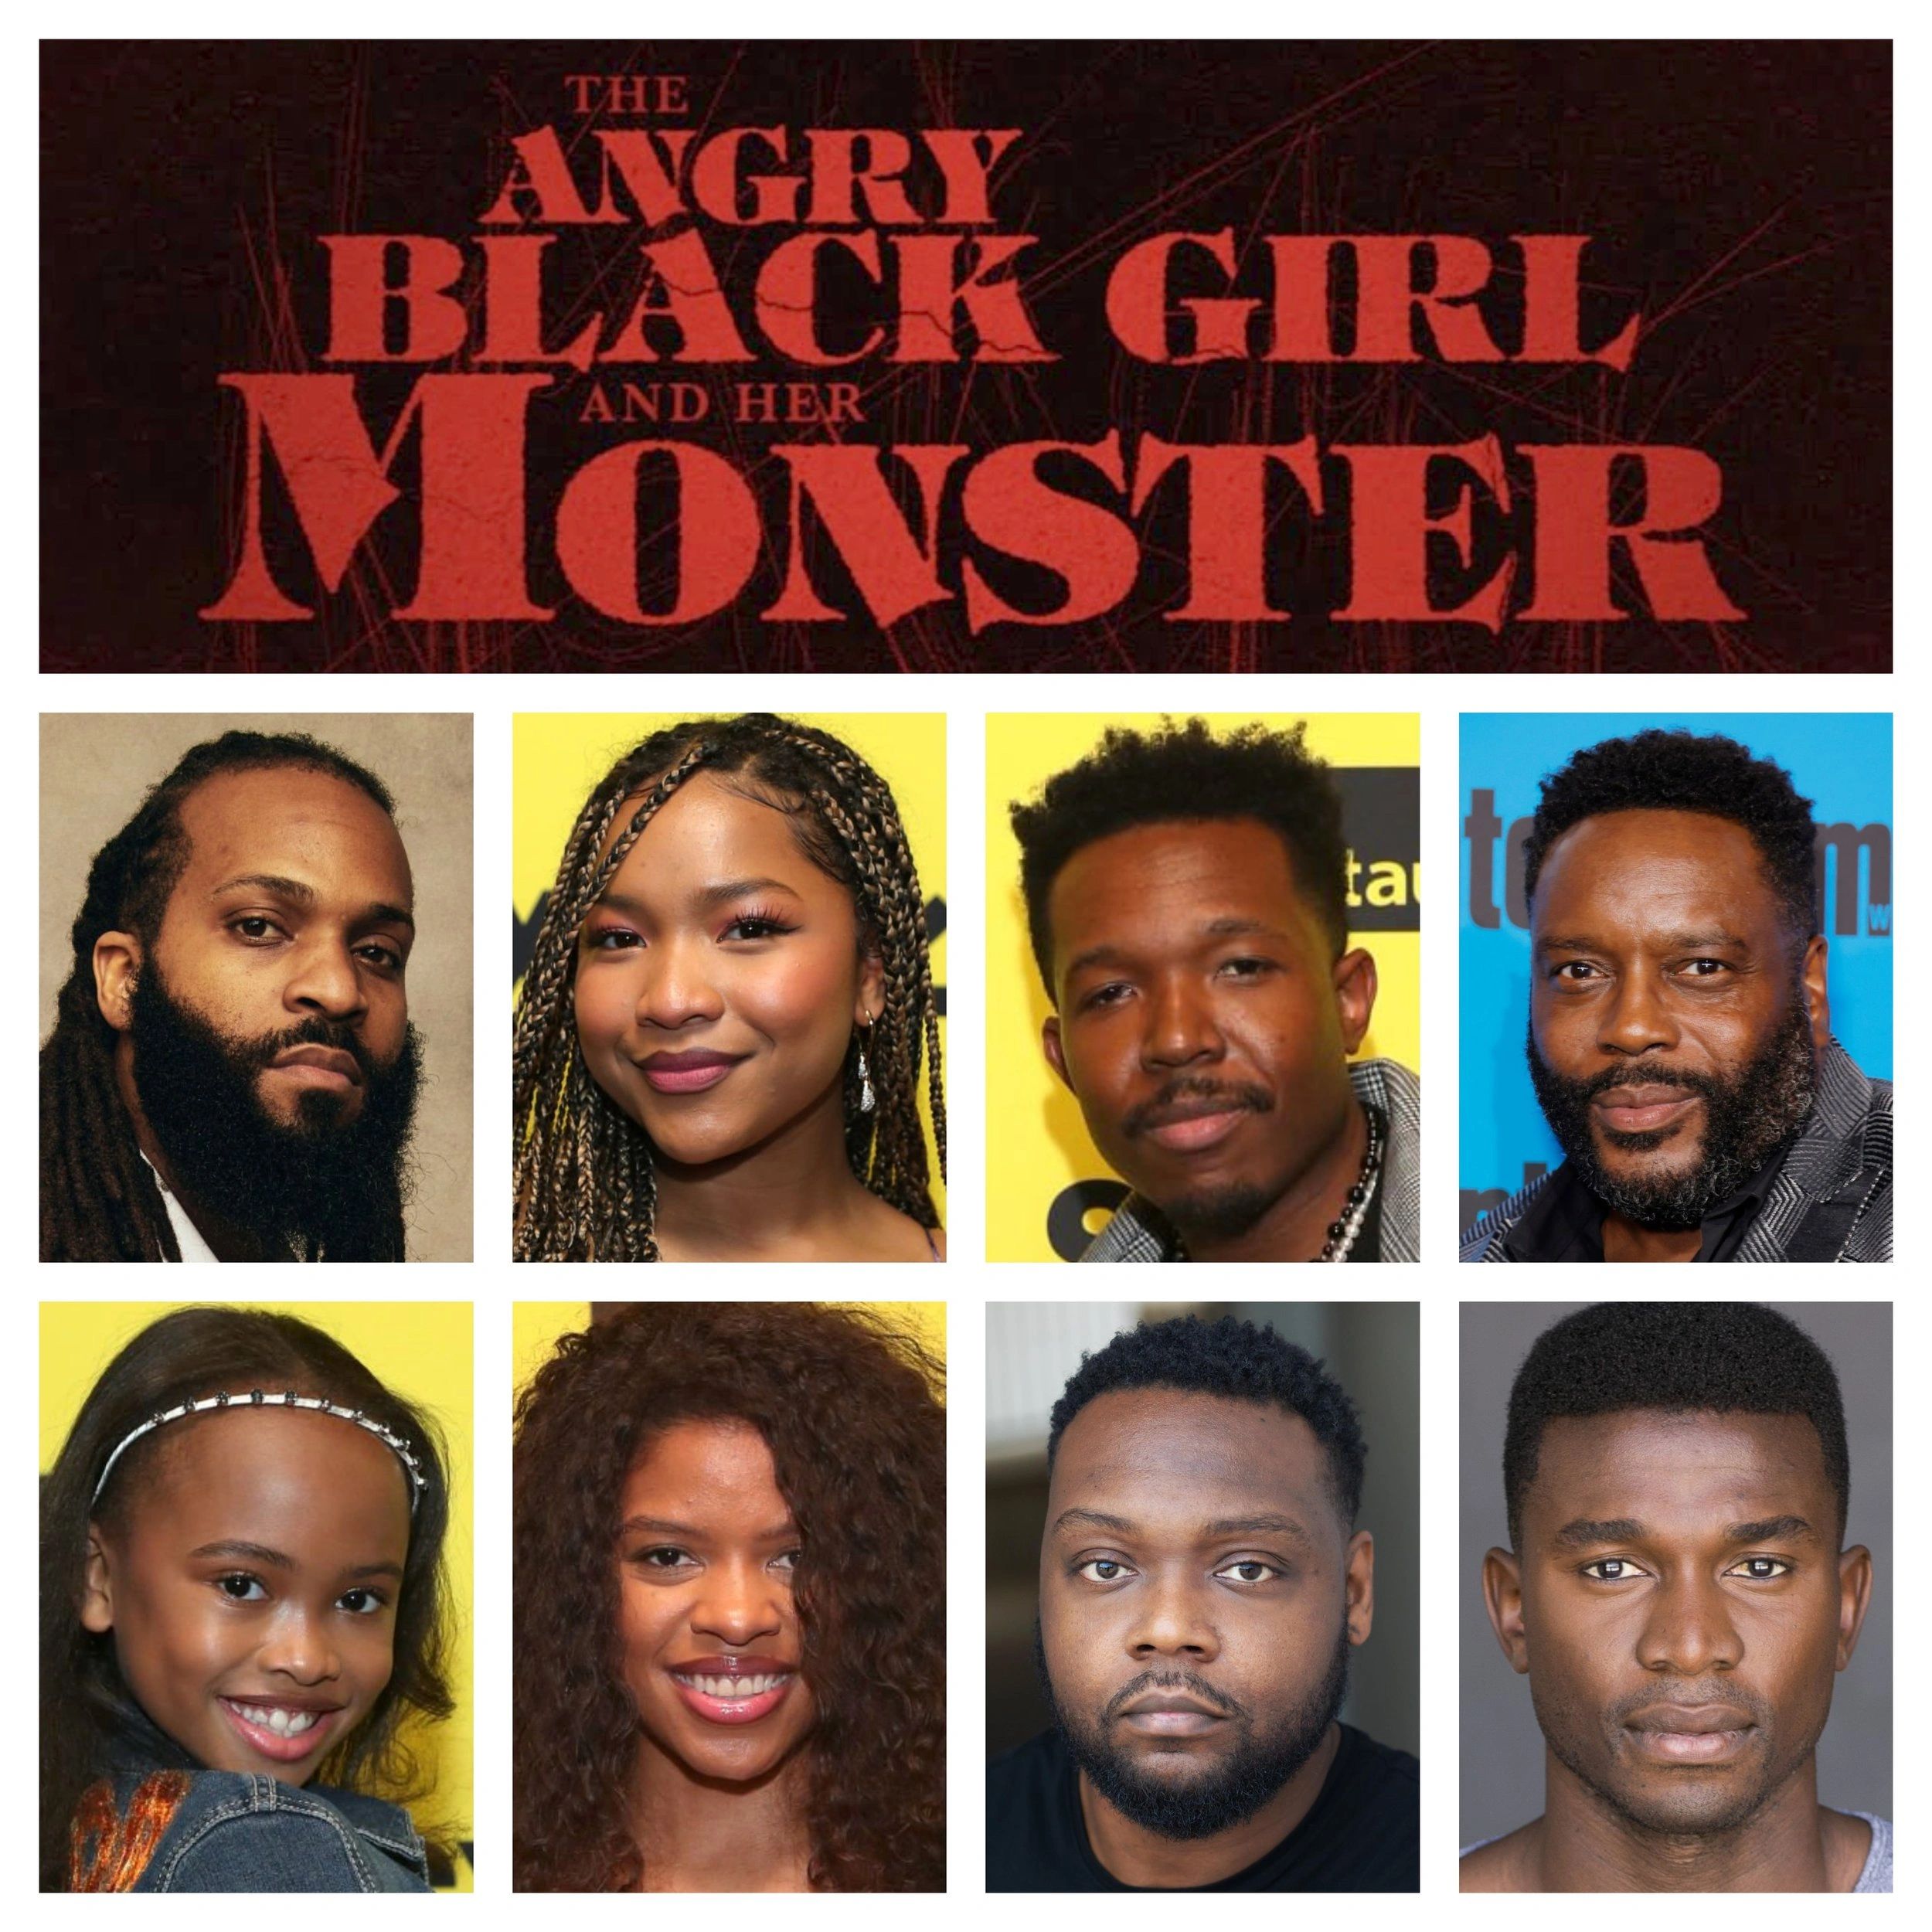 Denzel Whitaker On "The Angry Black Girl And Her Monster" & More